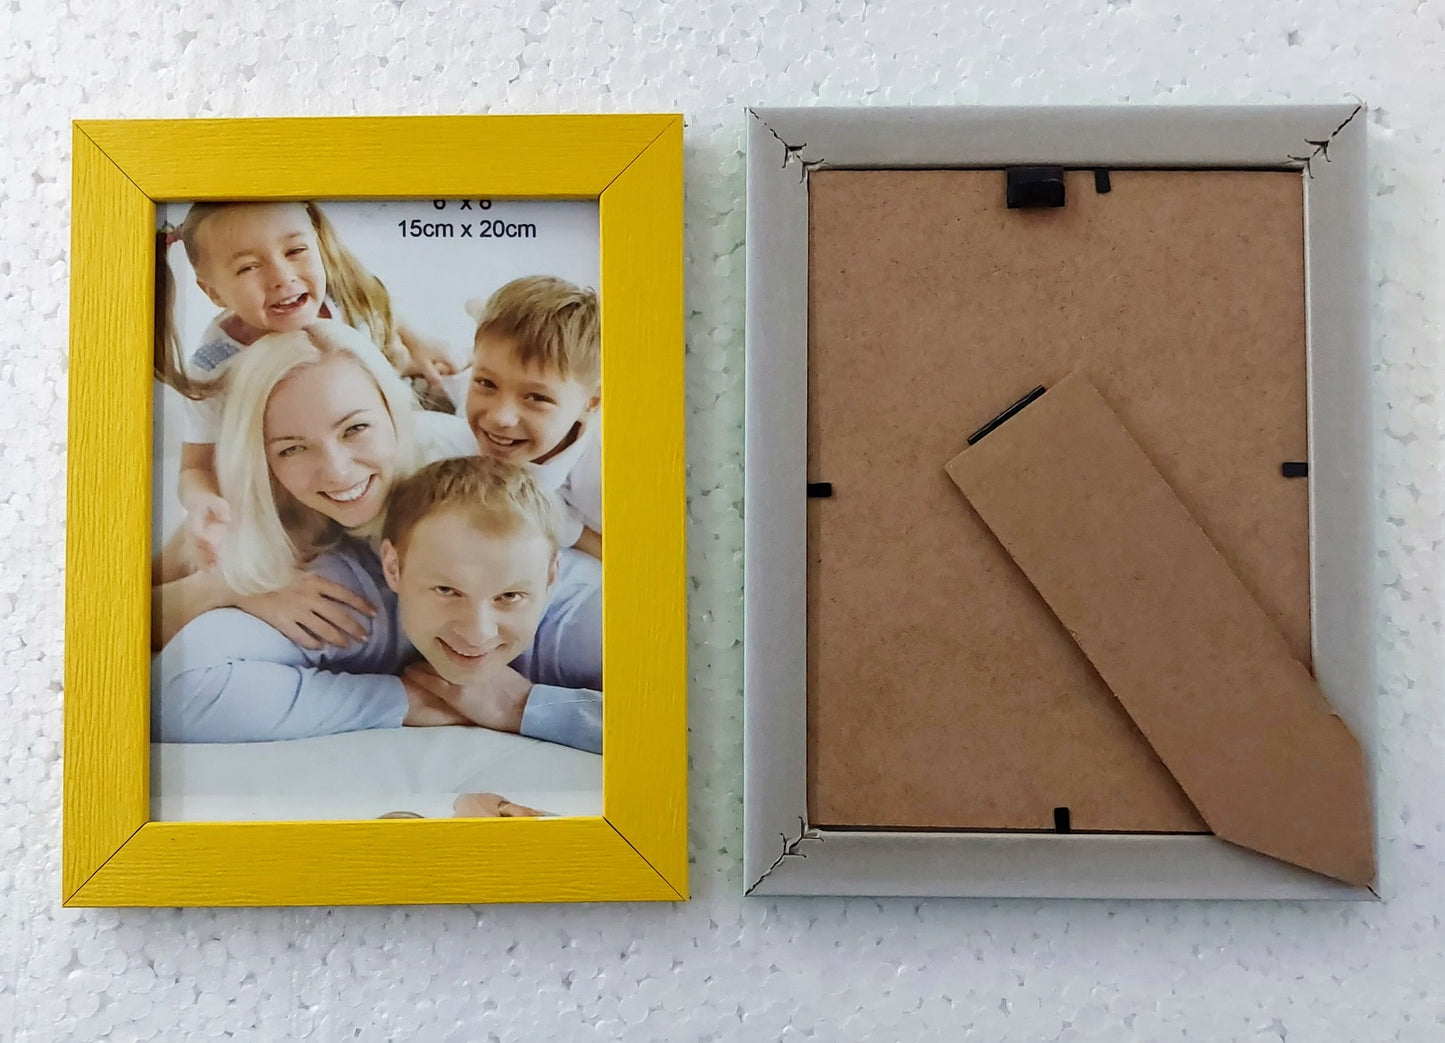 Photo frame Color Glass & Synthetic Wood MOQ 100 Pcs @ Factory price 6X8